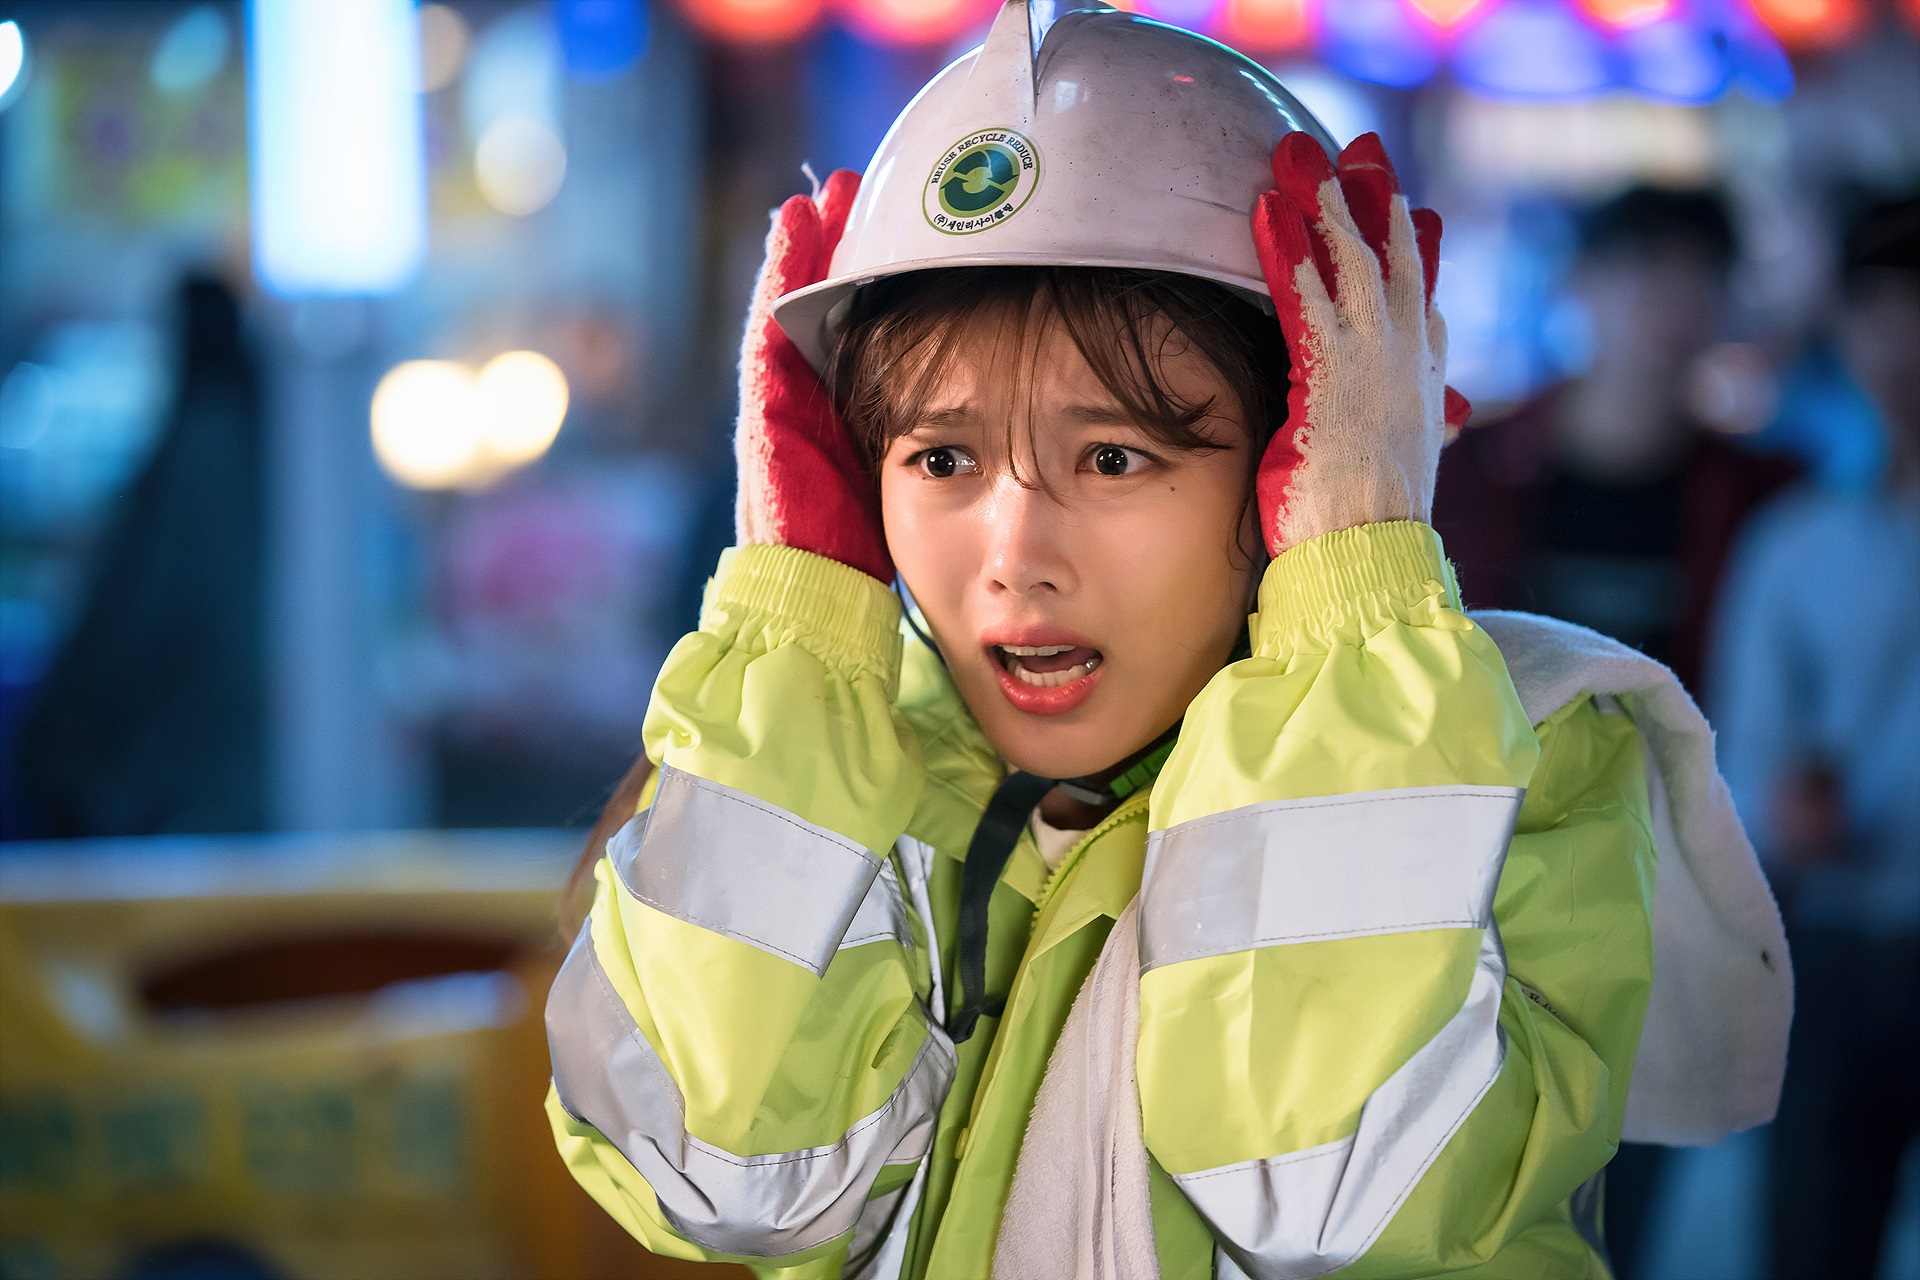 Kim Yoo-jung, who is once hot, spreads the Happy Virus with his previous only tear visuals and his broken hard carry activities.On November 22, JTBCs monthly drama, Once Cleaning Hot (director Noh Jong-chan, playwright Han Hee Young, production drama House, Oh Hyung-je), which will be broadcasted on November 26, unveiled a six-piece set featuring the ever-changing charm of the trusted actor Kim Yoo-jung, and fully anticipated the Kim Yoo-jung table Gil Osol. I pulled him up.It is a sterile-free healing romance that meets with CEO Jang Sun-gyeol (Yoon Gyun-sang), who is the most important cleaning company in cleanliness, and Kim Yoo-jung, the chief executive of Passion Manleb, who is ahead of cleanliness.Based on Dongmyeongs popular webtoon, we have completed the lineup that we believe in joining the actors such as Yoon Kyun-sang, Kim Yoo-jung, Song Jae-rim, Yoo Sun, Ahn Seok-hwan, Son Byung-ho, Kim Won-hae and Kim Hye-eun.Min Do-hee, who adds the vitality of the drama, and Kim Min-gyu, Hak-jin and Cha In-ha, who are the new generation with personality and acting ability, join as the Fairy of Cleaning and are responsible for the fun of the world.Kim Yoo-jung is at the center of the casting that has already been full of expectations.Kim Yoo-jung has been writing a myth of box office success by demonstrating the magic that makes imagination a reality in the work with the original work with excellent character digestion ability, irreplaceable charm, and no need for explanation.Especially, it adds meaning to the first work since it became an adult to clean up hot once.This is why Kim Yoo-jung, Gil Osol, which will be created as a real-life sniper youth empathy character, is waiting.To this end, Kim Yoo-jung has entered a perfect acting transformation.The photo shows the hot summer days of Kim Yoo-jung, who receives the trust of the production team as a broken-up Hot Summer Days.Kim Yoo-jung, who has a neck-stretched T-shirt and a rusty head, is a world-class Gil Osol itself.The sunshine smile that makes even the viewer happy can be seen as a charm of the gallant Gil Osol that does not get intimidated anywhere.Passion-filled jaw-mounted, which seems to be life-threatening, steals attention in a physical fitness test for joining the Cleaning Fairy run by Jang Sun-gyeol.In particular, Kim Yoo-jung, who runs without a heavy sack, stimulates curiosity about Gil Osol Character, a subject.From the octopus Mukbang of Naesungjero to the appearance of a horse-haired environmental cleaner who has been racing in a frenzy, he foresaw hard-carry activities with an infinite transformation.Gil Osol, a career seeker who is more likely to work for Passion Manleb than clean, is a figure who has become a luxury not only for love but also for cleanliness as she has been tapping on all the worlds alba with Cheongpo Women (a woman who gave up cleaning) whose knee-up reasoning has become a trademark.In order to create Gil Osol as a realistic figure who sympathizes with him, Kim Yoo-jung is creating a lively character as Hot Summer Days who do not buy himself at the shooting scene.Kim Yoo-jungs transformation, which will show his unlimited acting by adding a friendly and cheerful appearance to his unique loveliness, is expected.The production team of Clean Up Once Hot said, I feel that the person named Gil Osol has become more perfect when he meets Kim Yoo-jung.Kim Yoo-jung, so I thought it was a possible character, so I realized it vividly.Passion, which does not miss minor details, makes it possible to transform infinitely, he praised, and stimulated expectations that he would be able to confirm Kim Yoo-jungs hard carry performance.On the other hand, director Roh Jong-chan, who was recognized for his sensual production in Preparation for acquisition and War of the Palace Cruelty - Flowers based on Dongmyeongs webtoon, and Han Hee Jeong, a Korean gunman, coincided.It will be broadcast first on JTBC at 9:30 pm on November 26th (Month) following Beauty Inside.Netizens are expected to Yu-Jeong act through various SNS and portal sites.Character also digests with a lot of charms,  Yu-Jeong Actor Fighting , I wanted to see Yu-Jeong , I should use my own room.It seems to be fun. iMBC  Photo Drama House, Oh Hyung-je